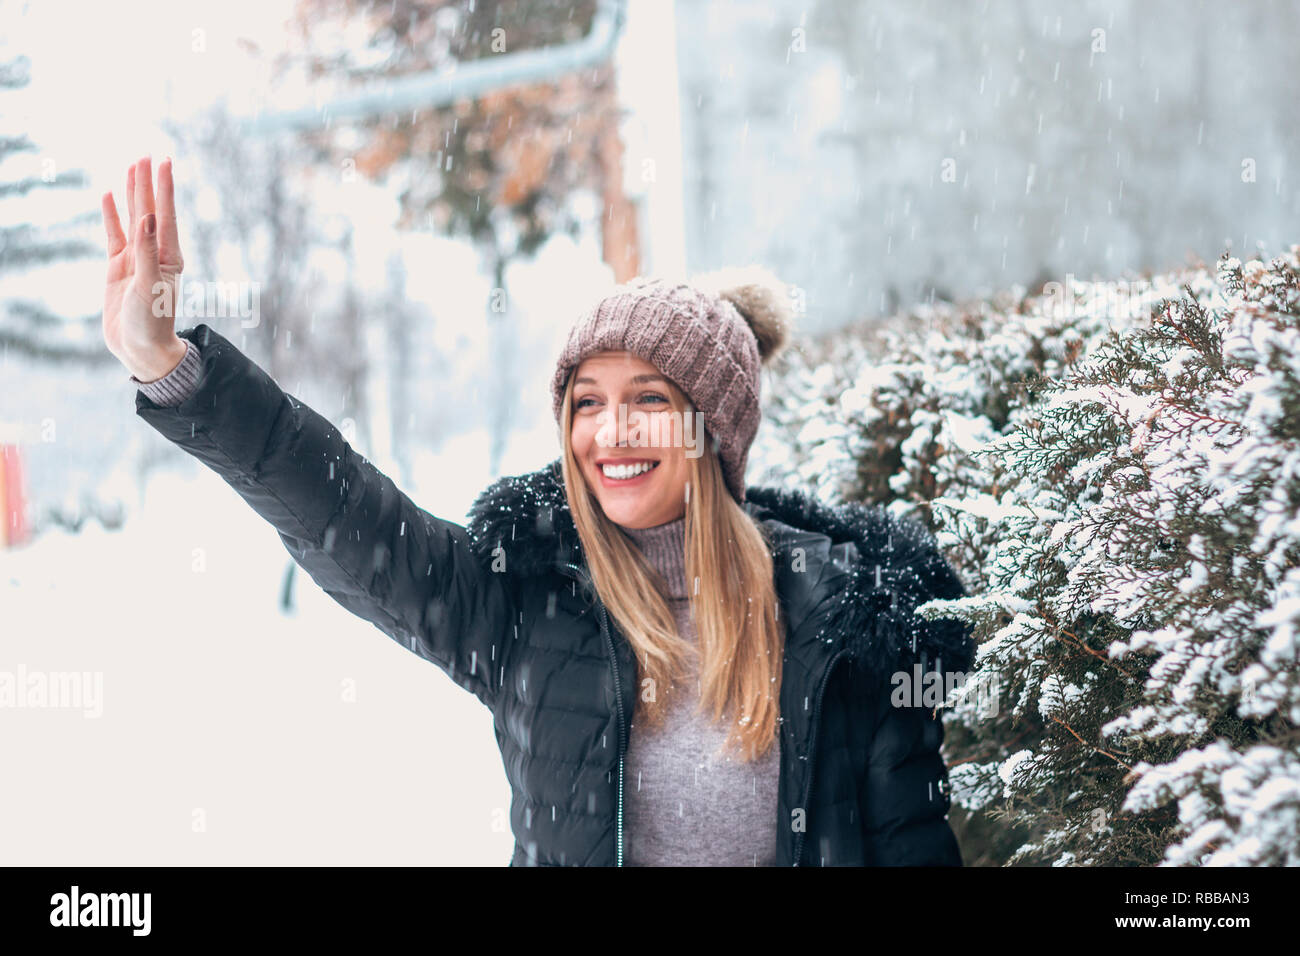 Portrait of beautiful woman in winter cloathes waving. Stock Photo